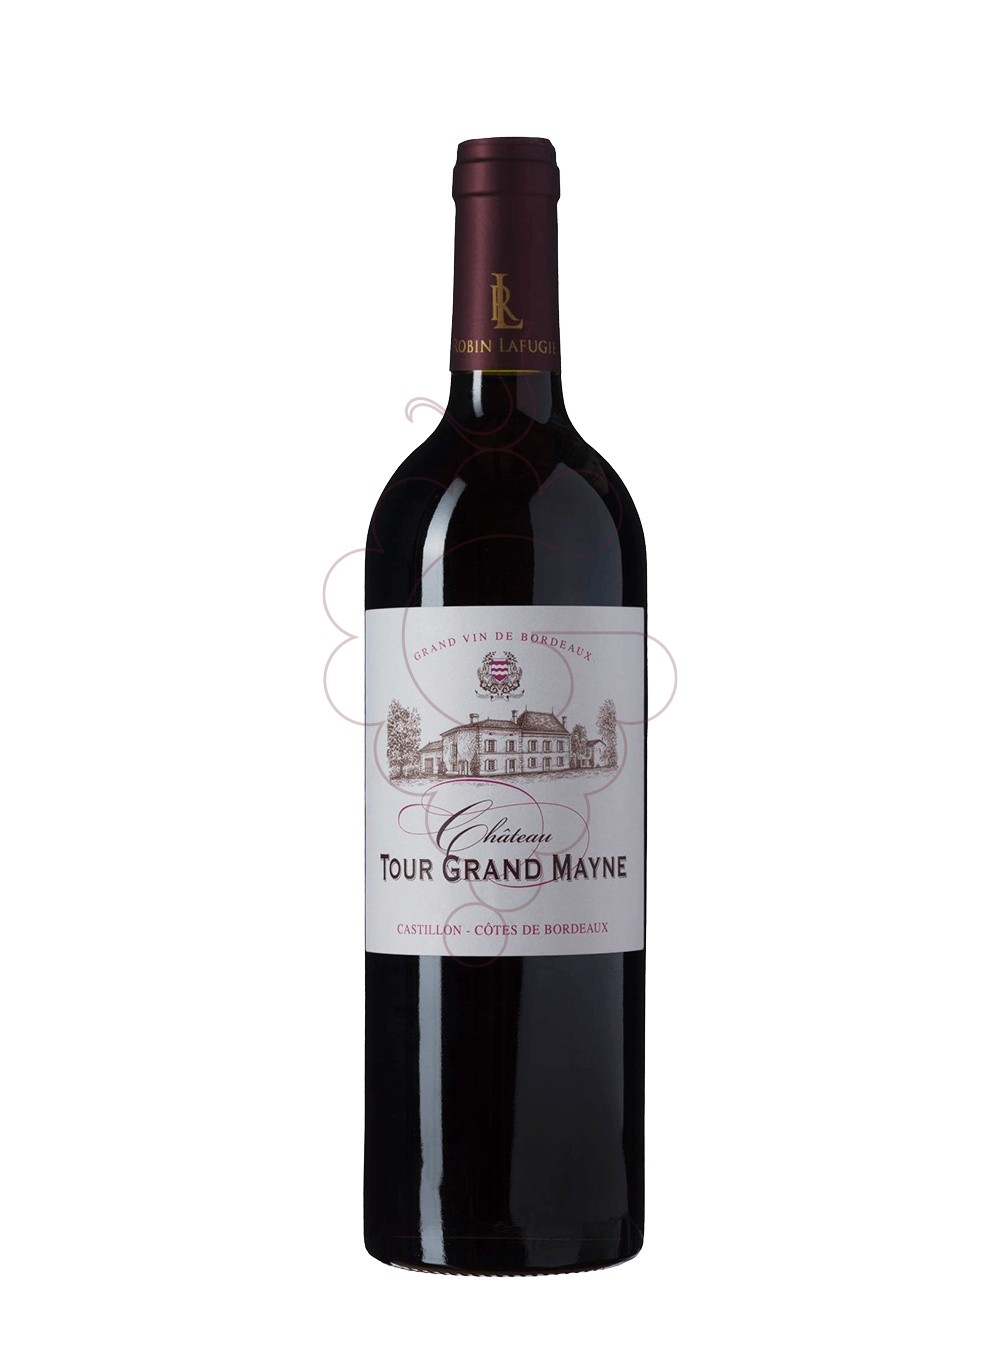 Photo Ch. tour grand mayne negre 18 red wine